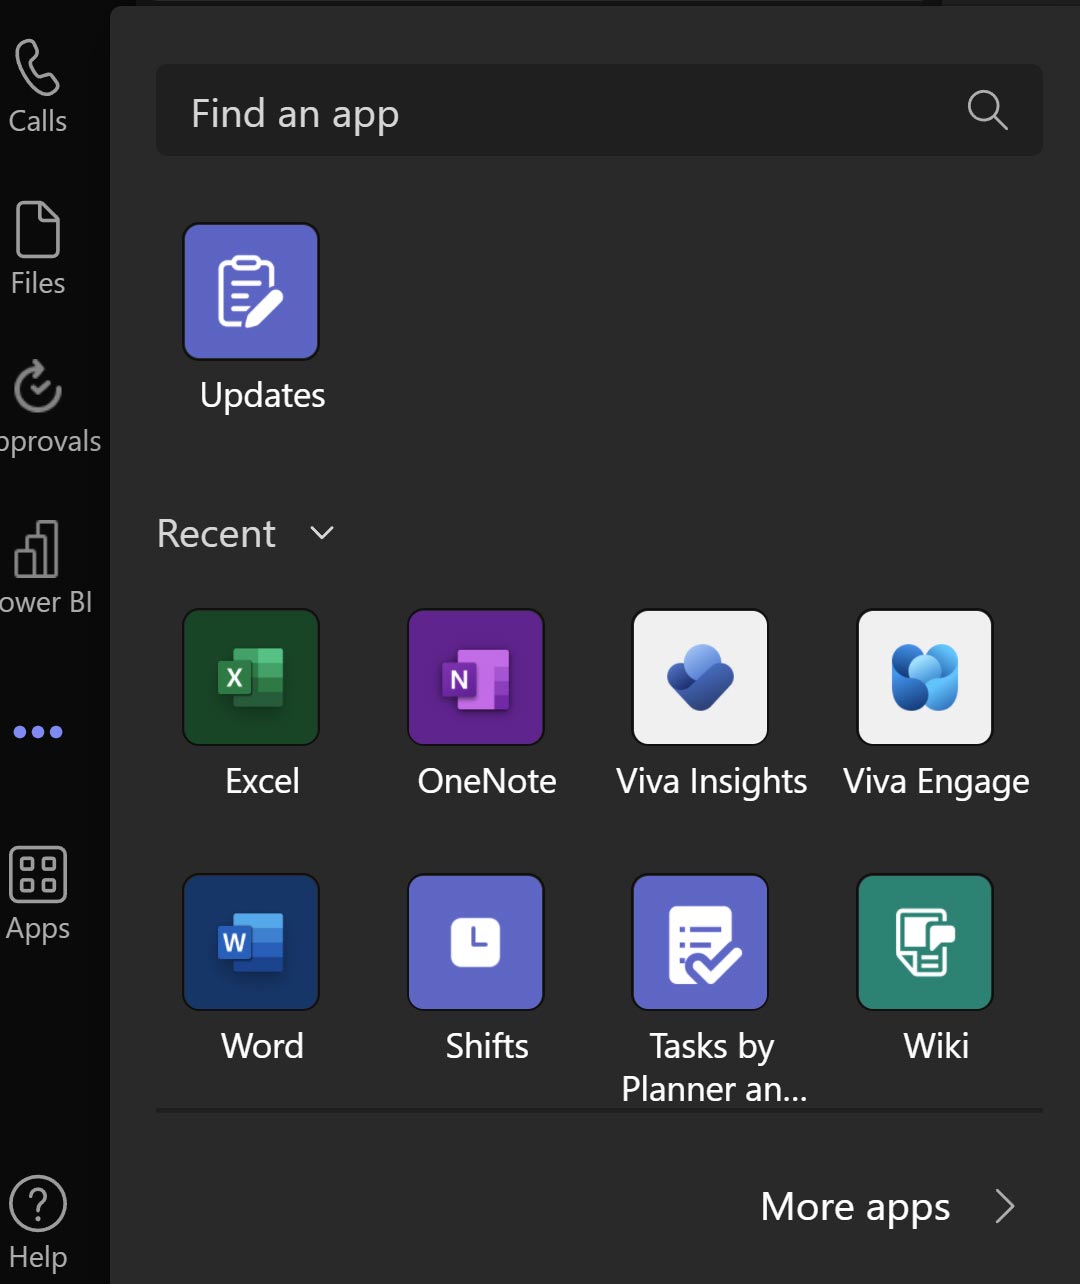 Manage the Updates app for your organization - Microsoft Teams